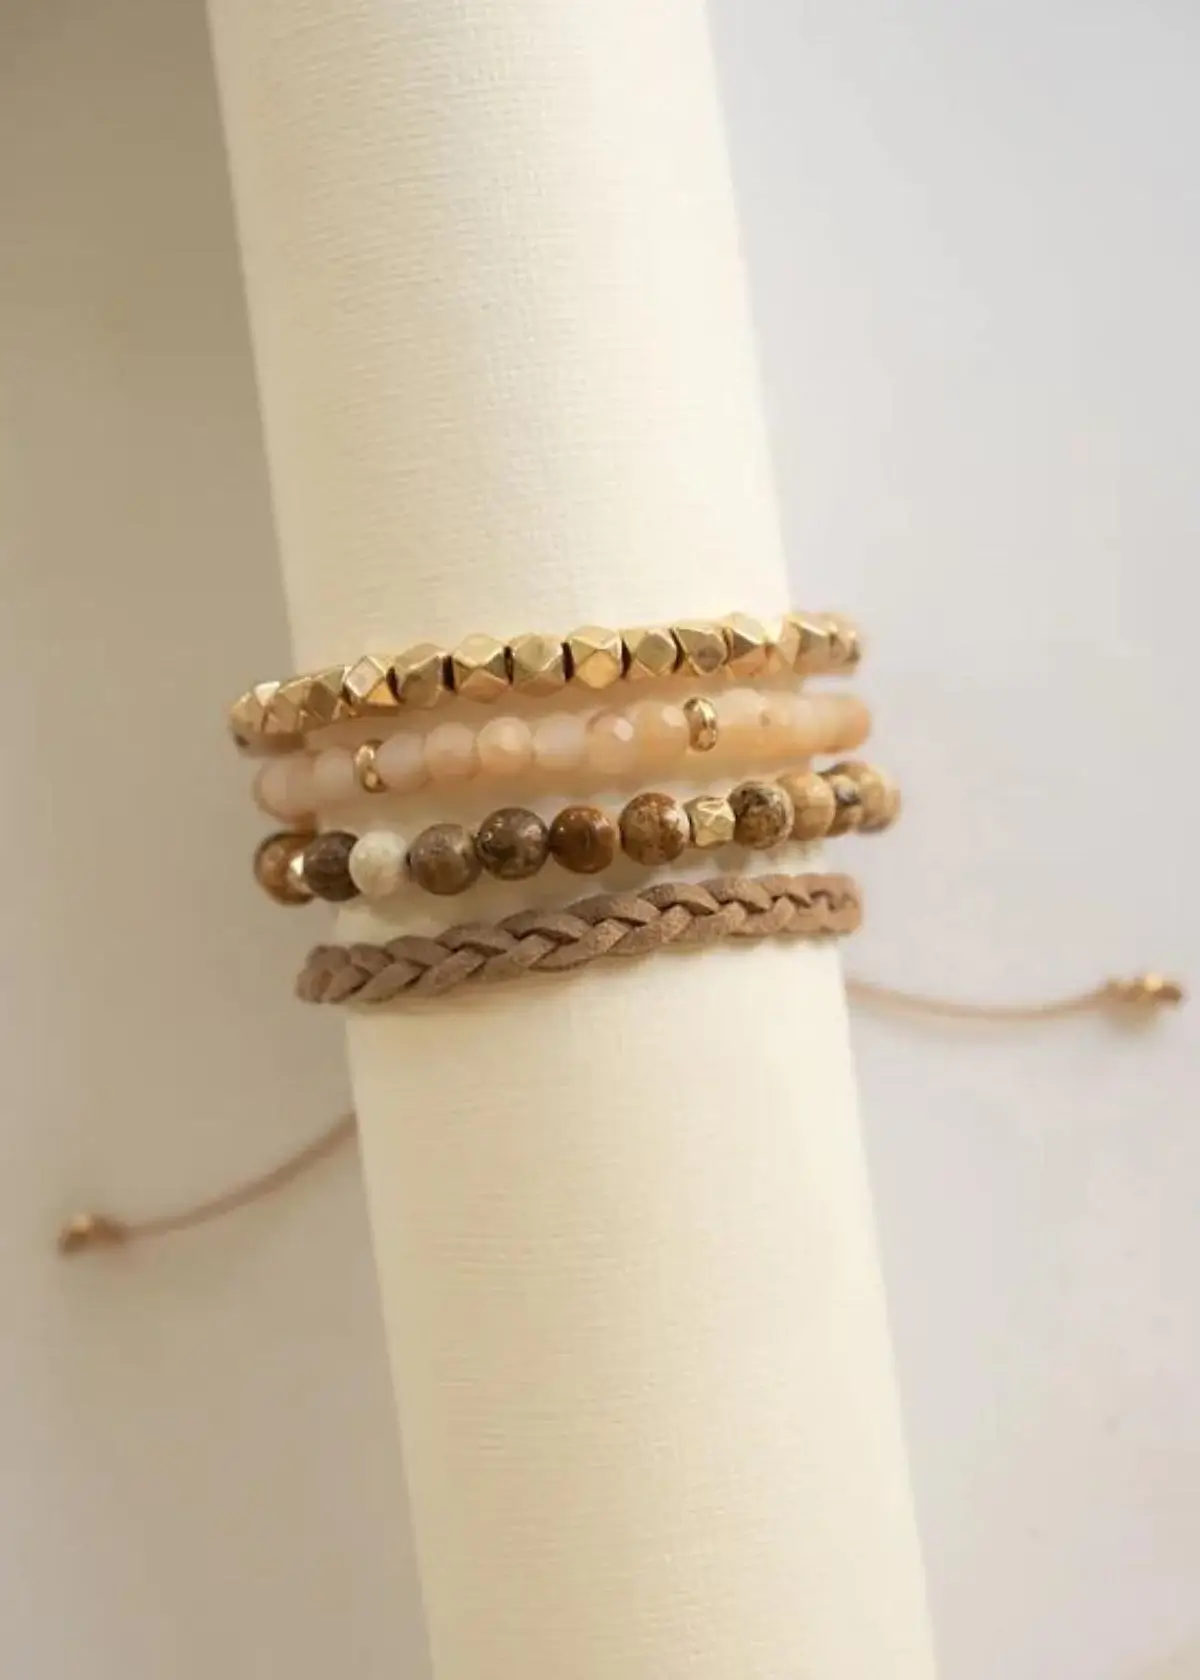 How many bracelets should I wear for a well-balanced layered look?